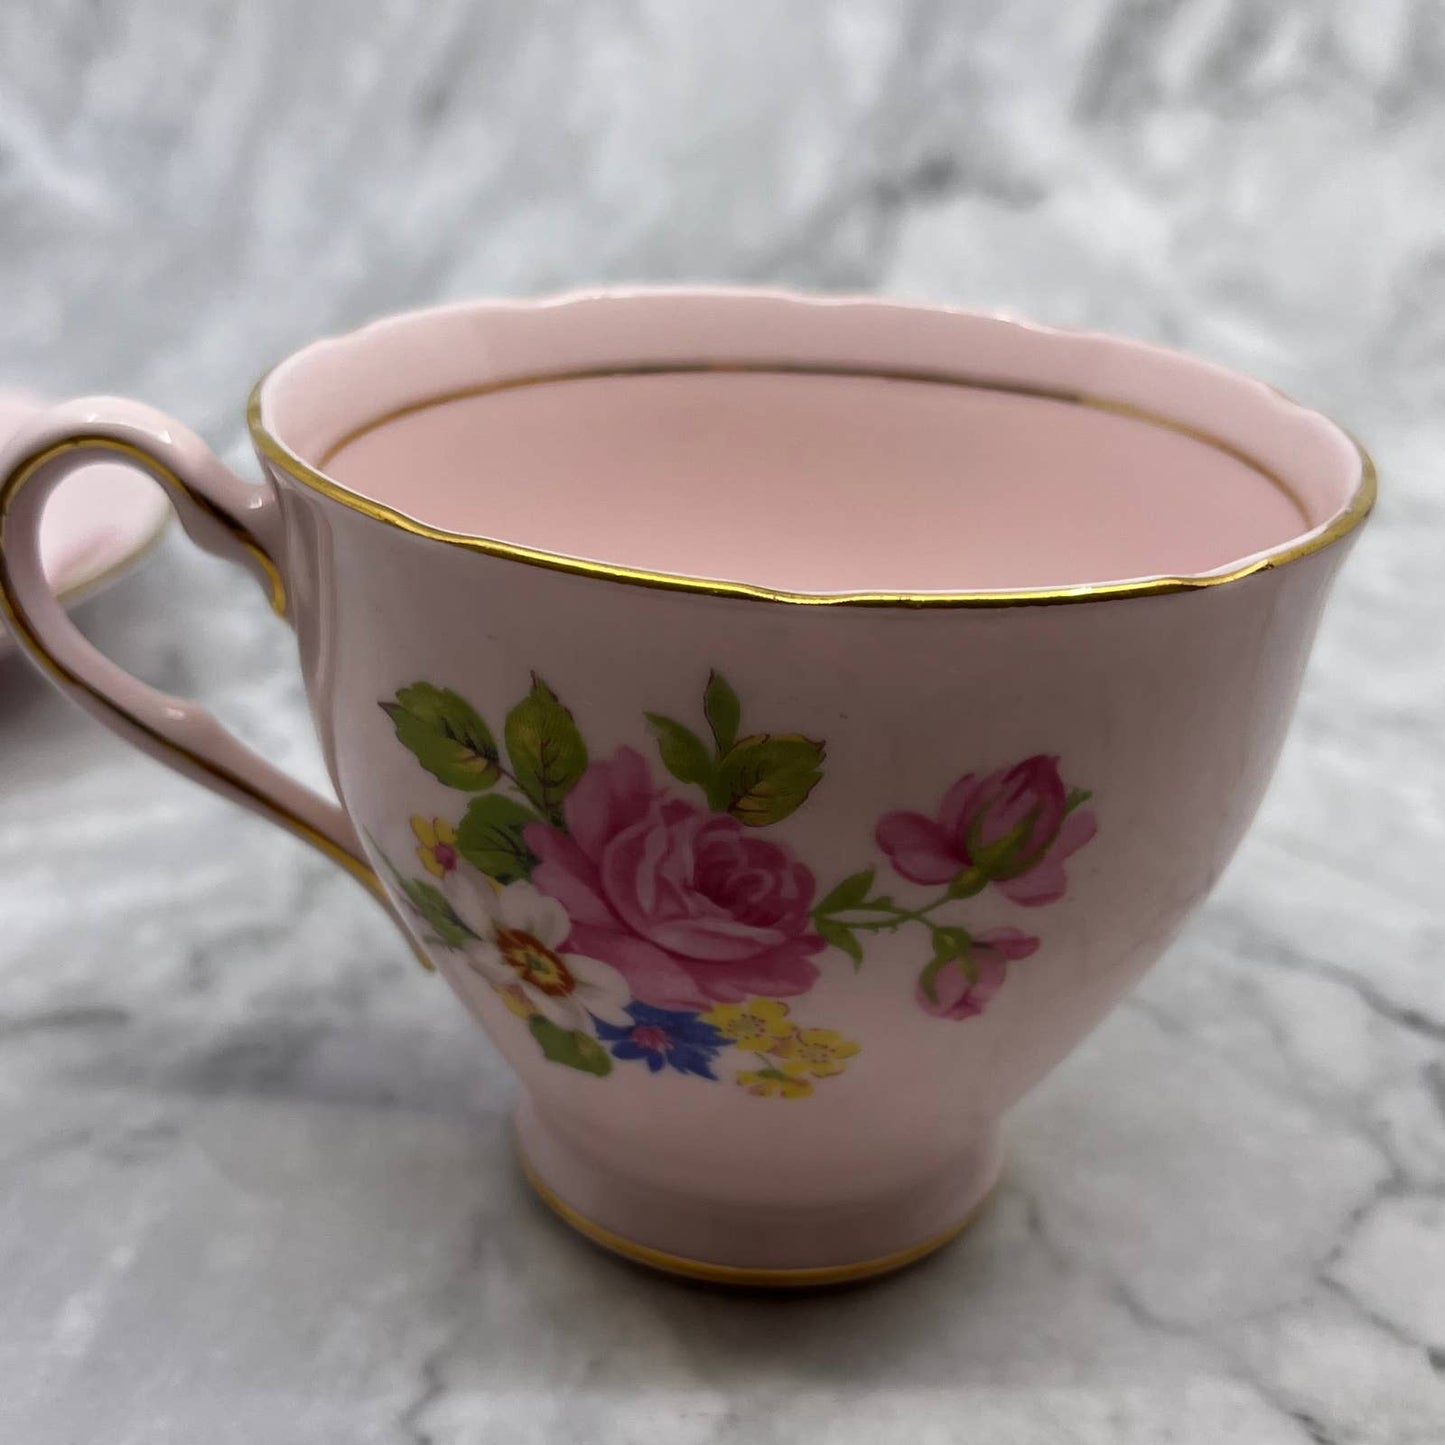 Colclough Pink Floral Tea Cup and Saucer, 8014, Made in England TD1